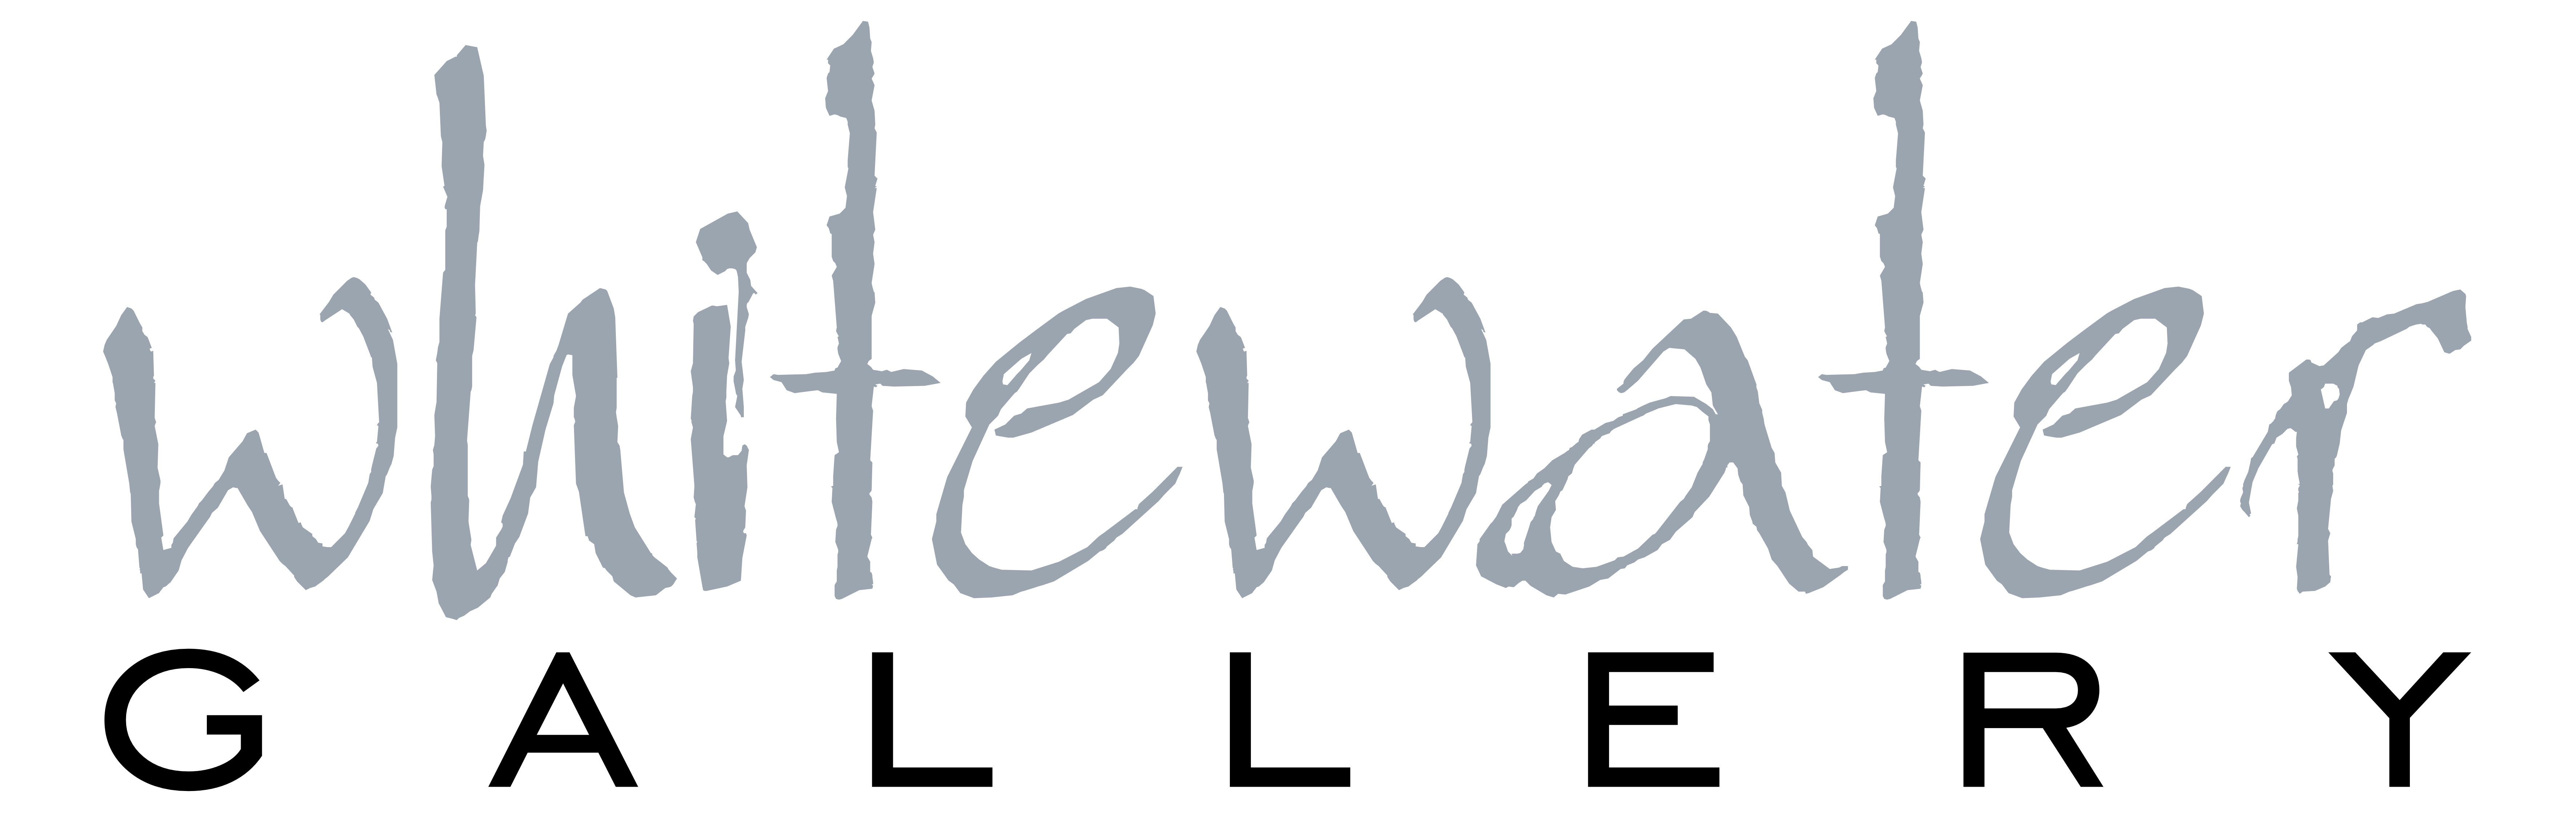 Whitewater Gallery company logo